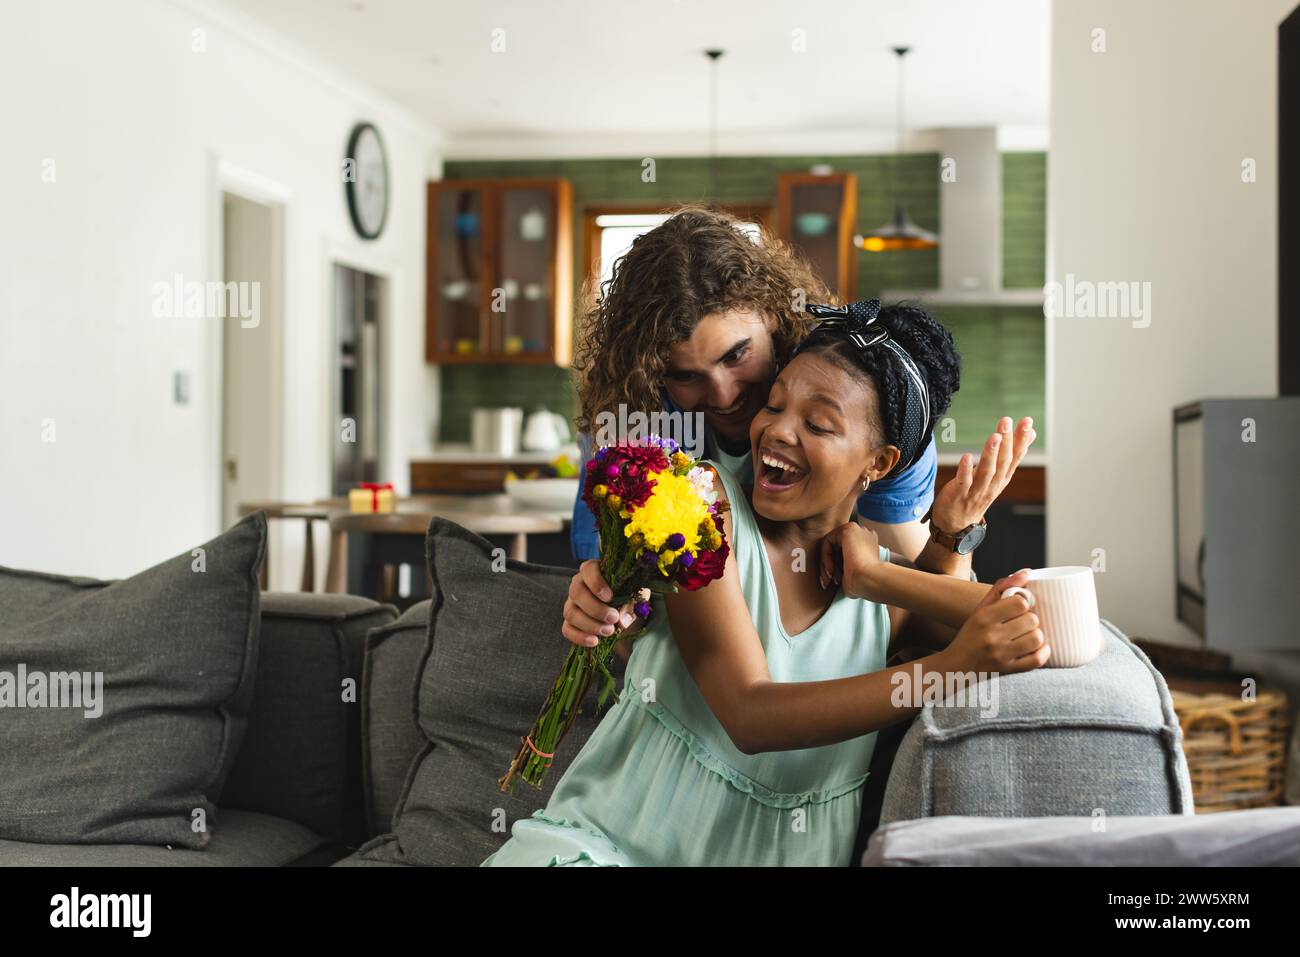 Caucasian man surprising African American woman with flowers at home on couch Stock Photo